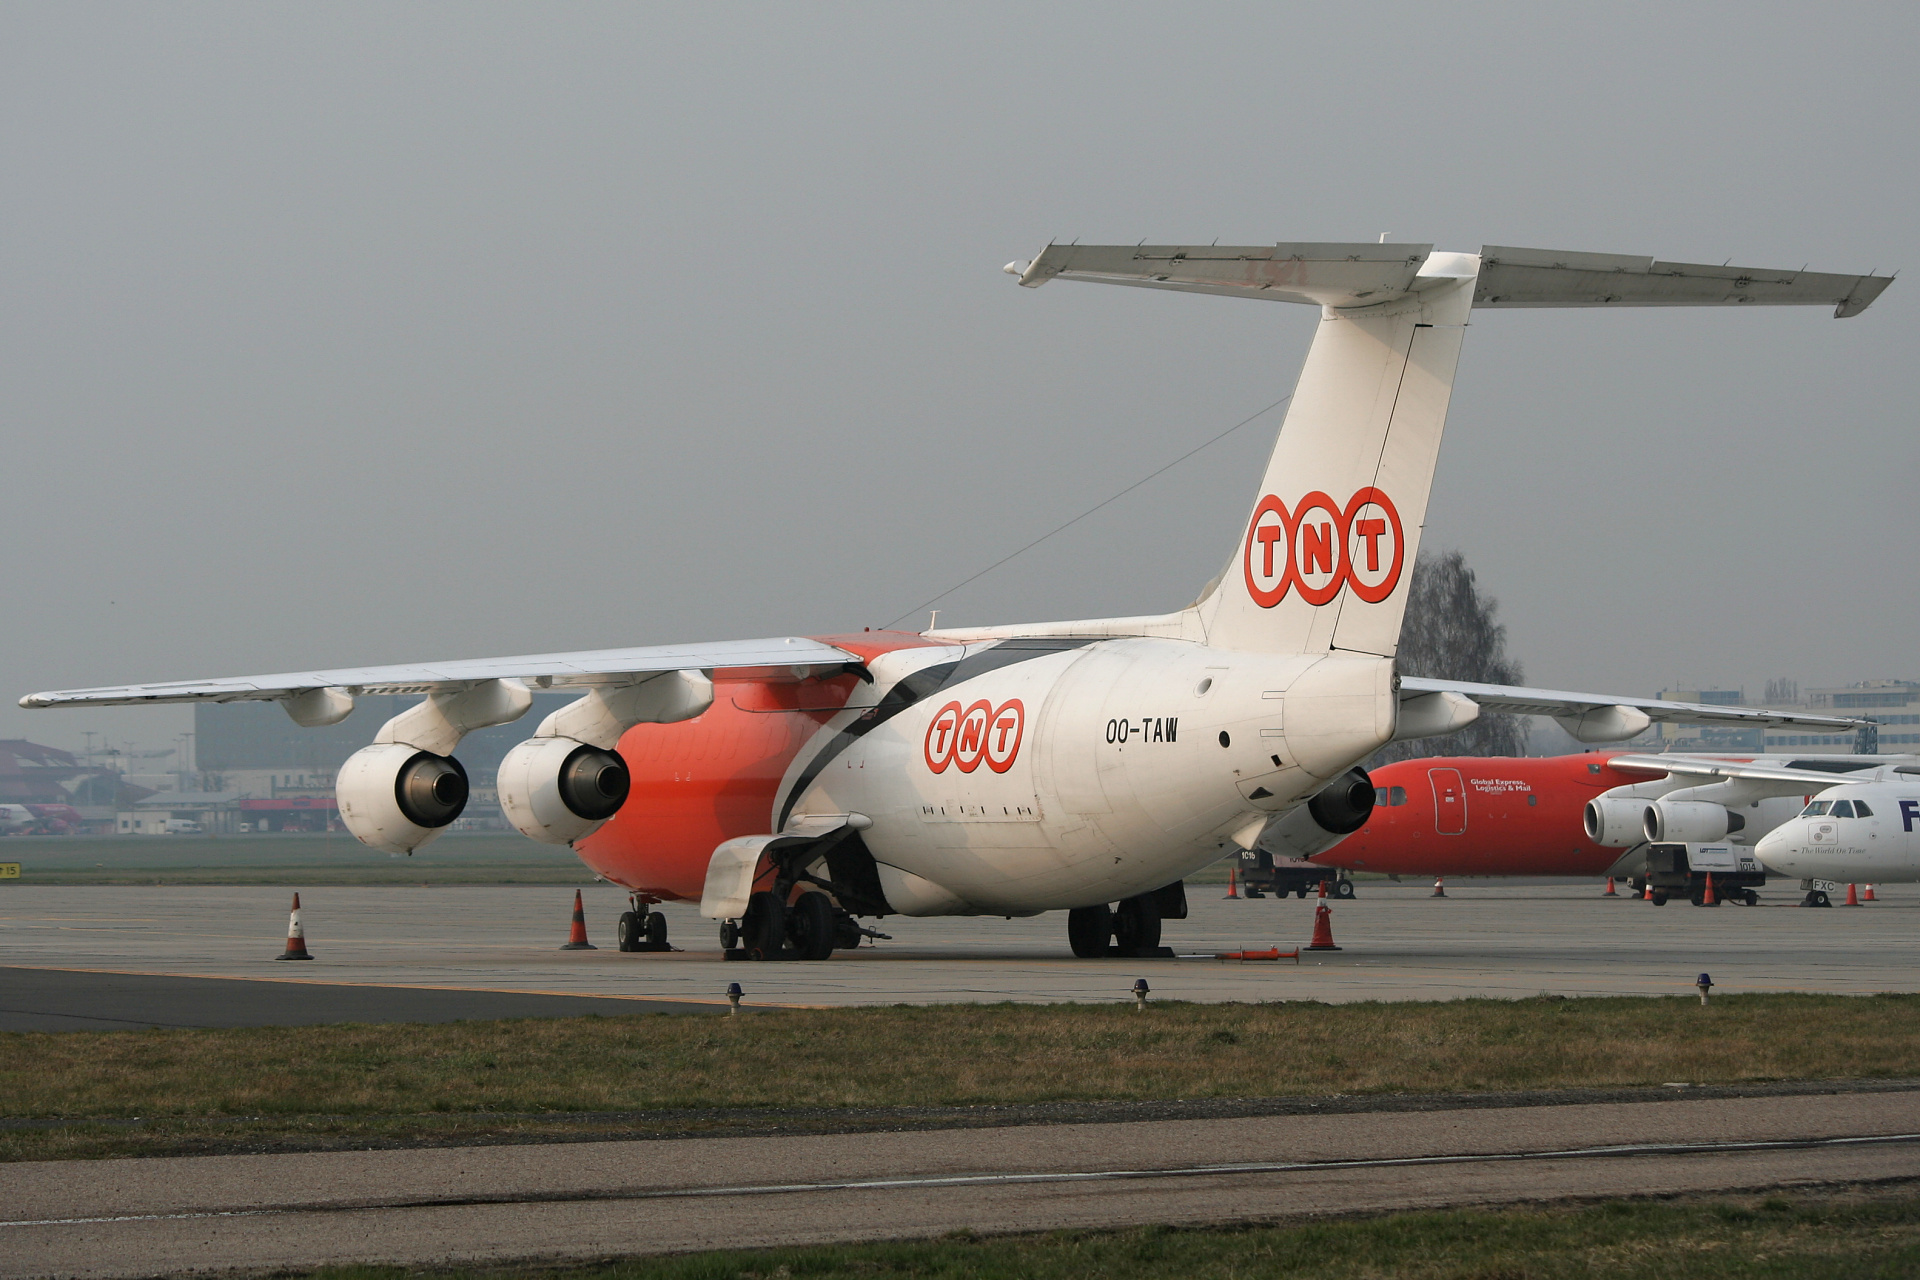 146-200QT, OO-TAW (Aircraft » EPWA Spotting » BAe 146 and revisions » TNT Airways)